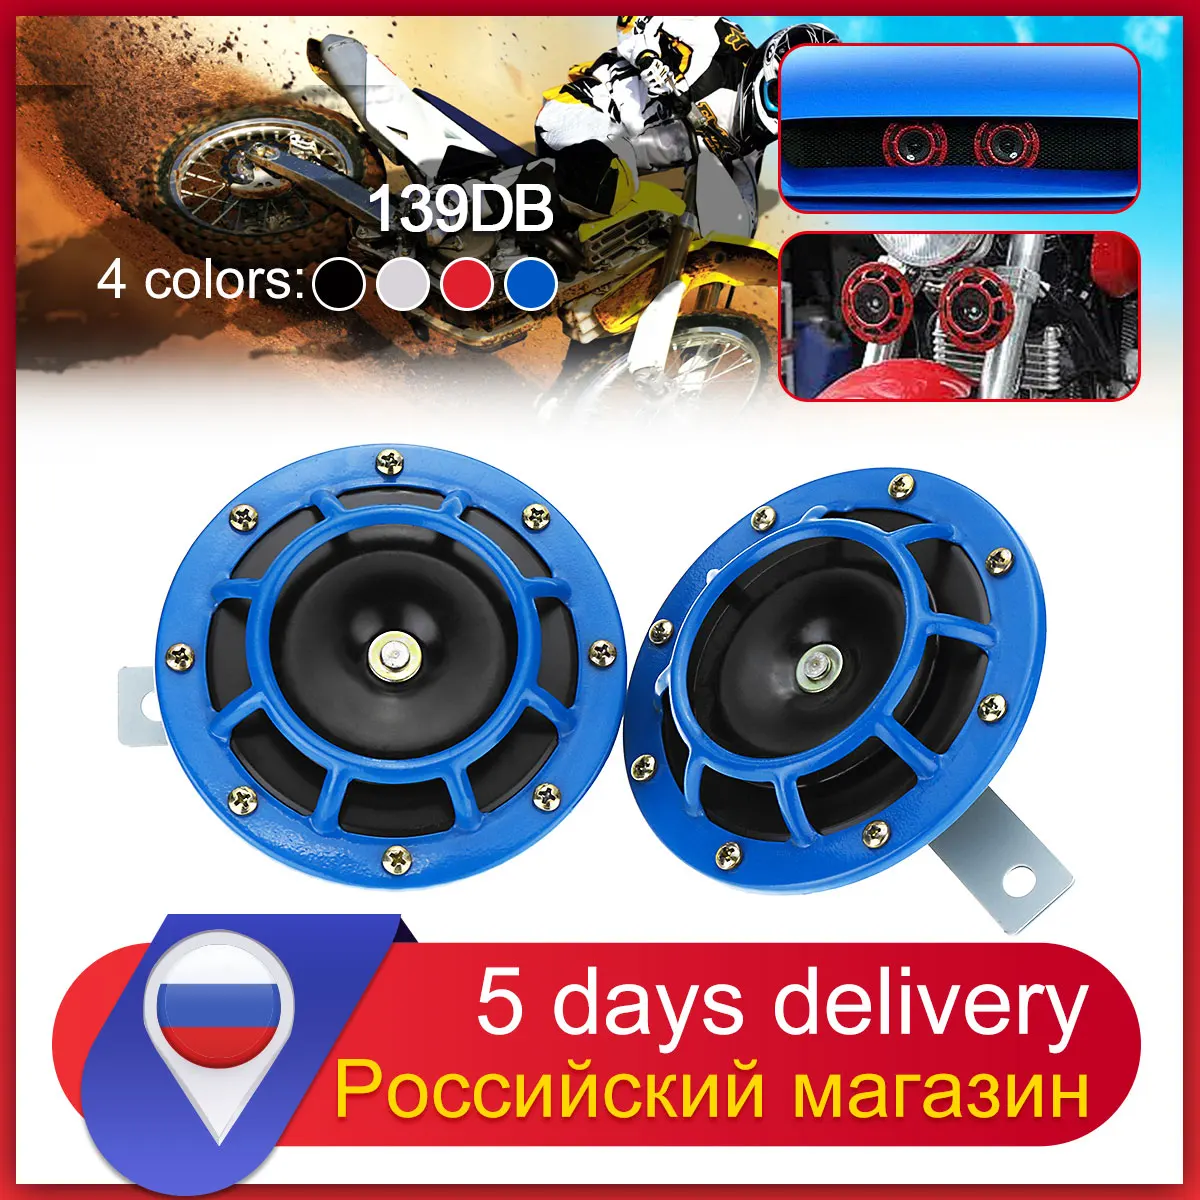 

x-Car Motorcycle Siren Dual Tone Electric Pump Loud Air Horn 12V 139db Off-road Grille Horn Blue Silver Black Red Universal